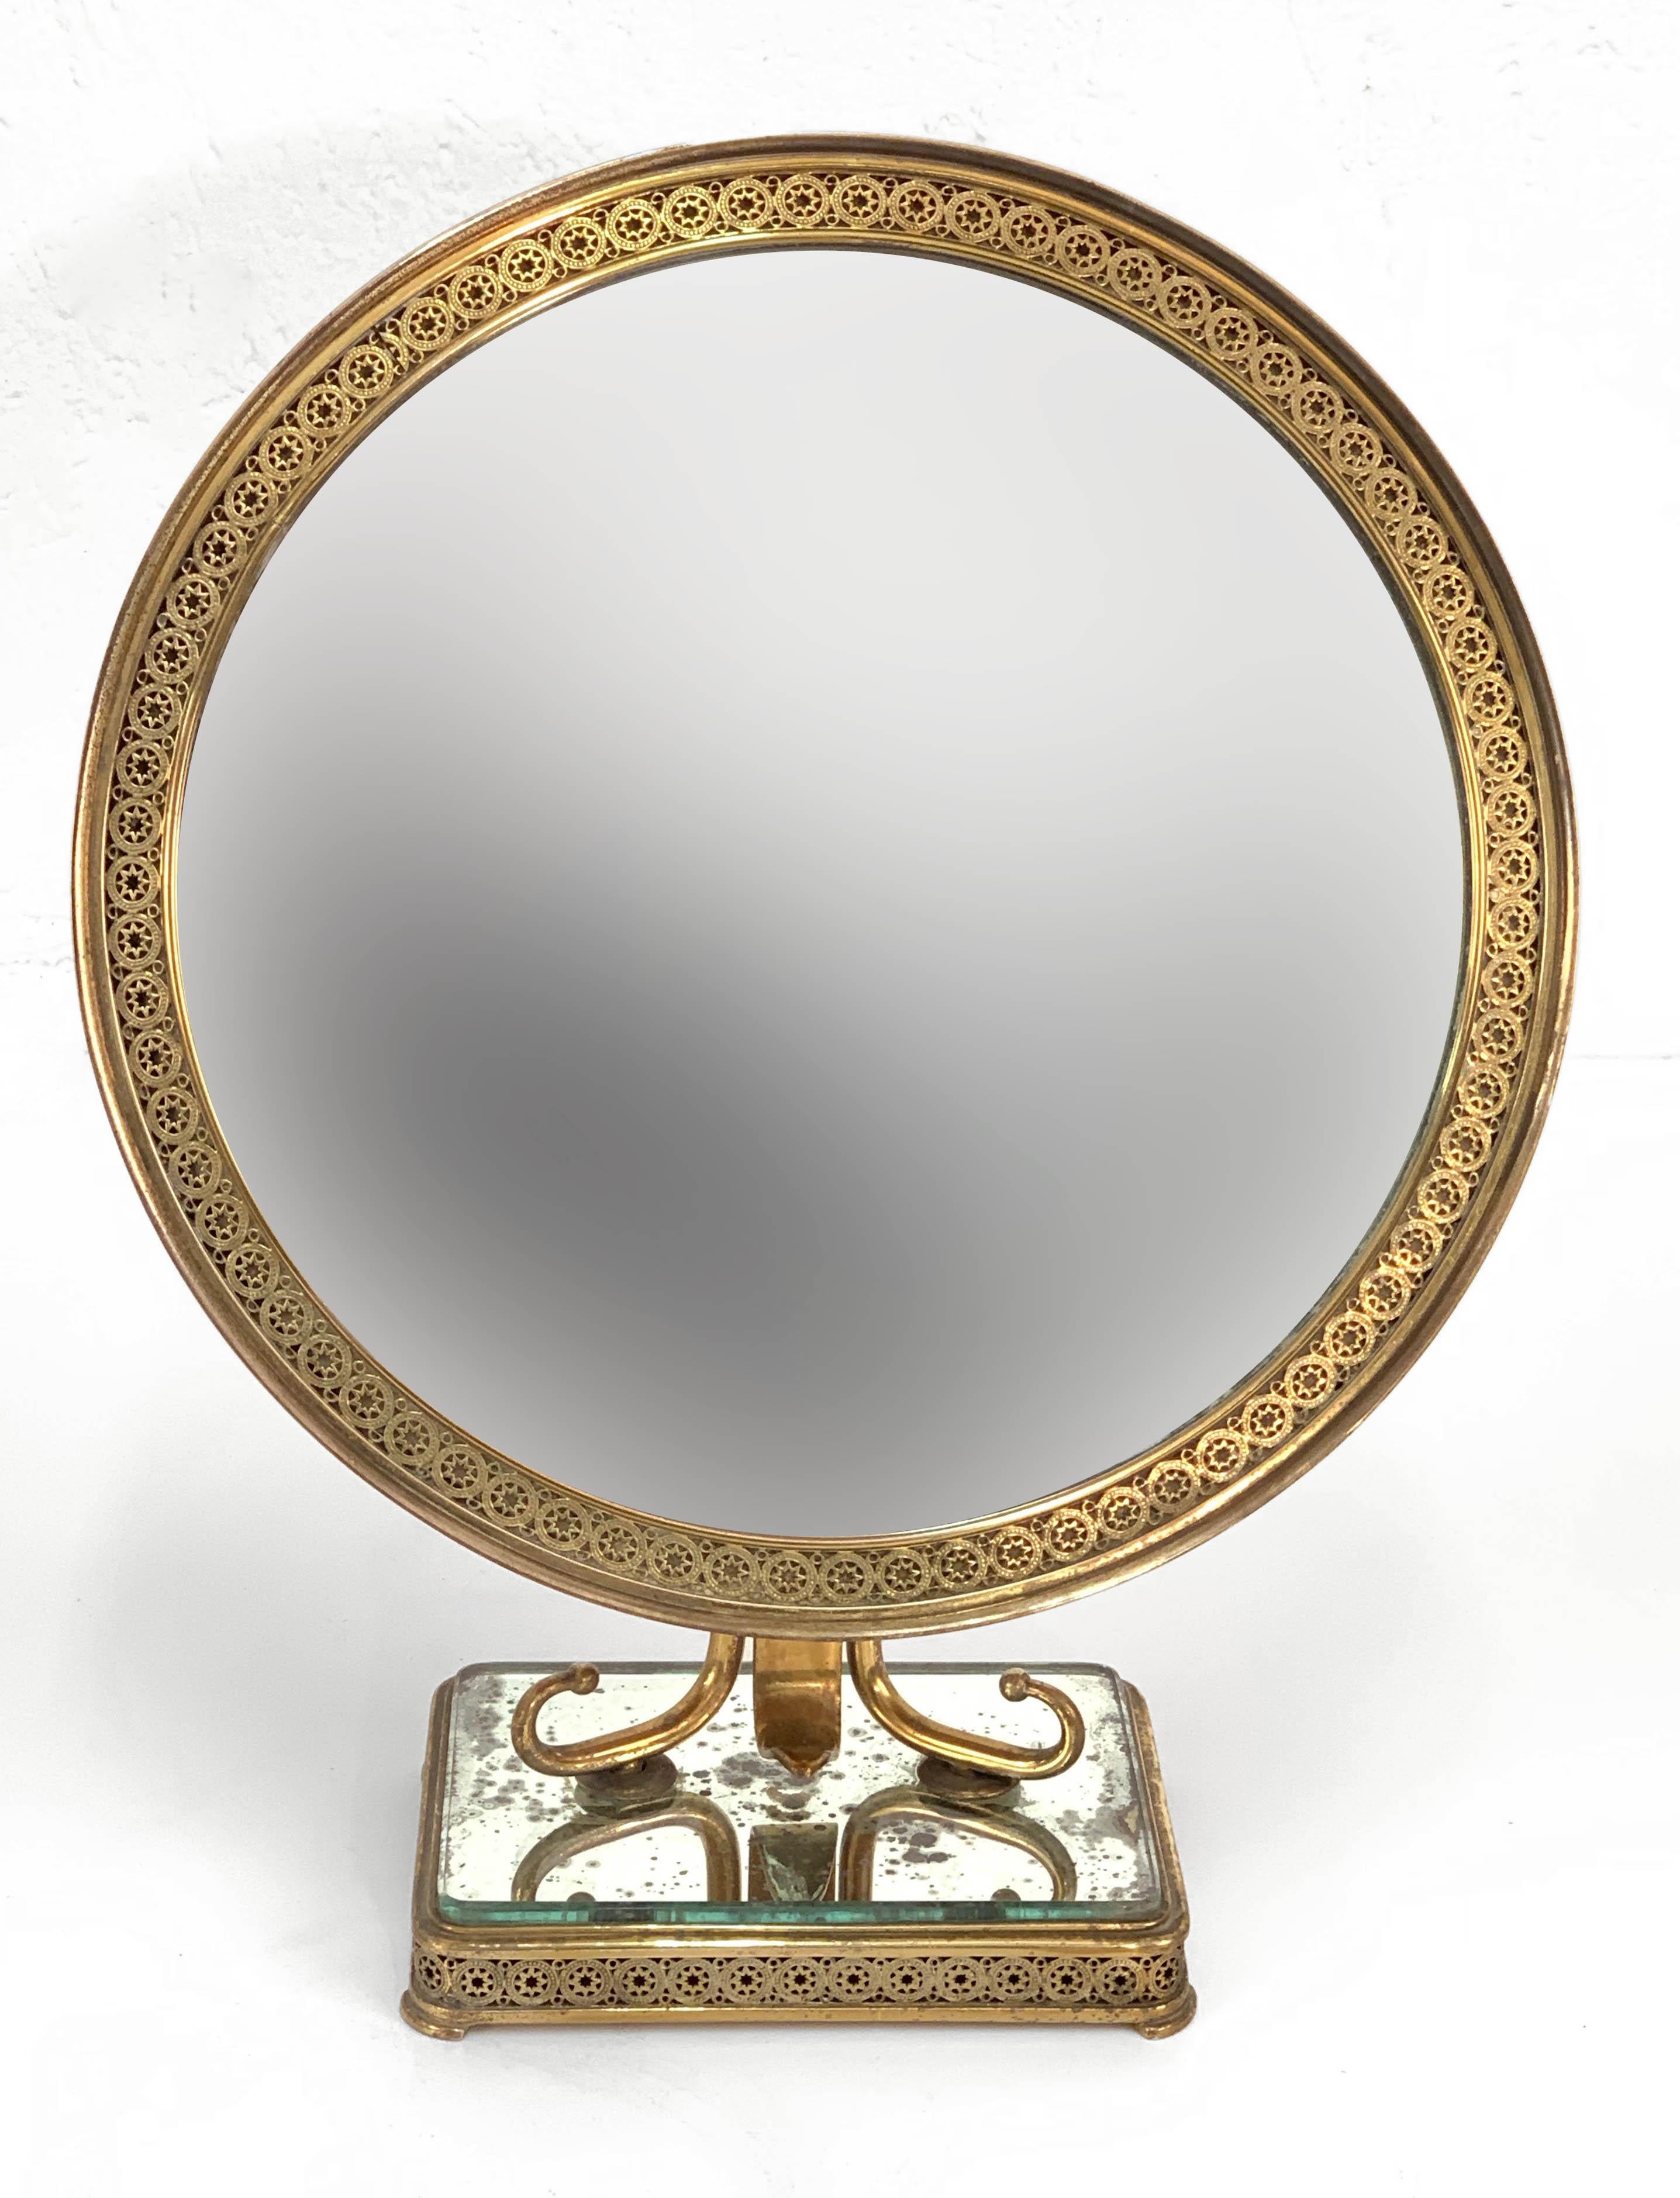 20th Century Neoclassical Adjustable Brass and Wood Italian Vanity Table Mirror, 1950s